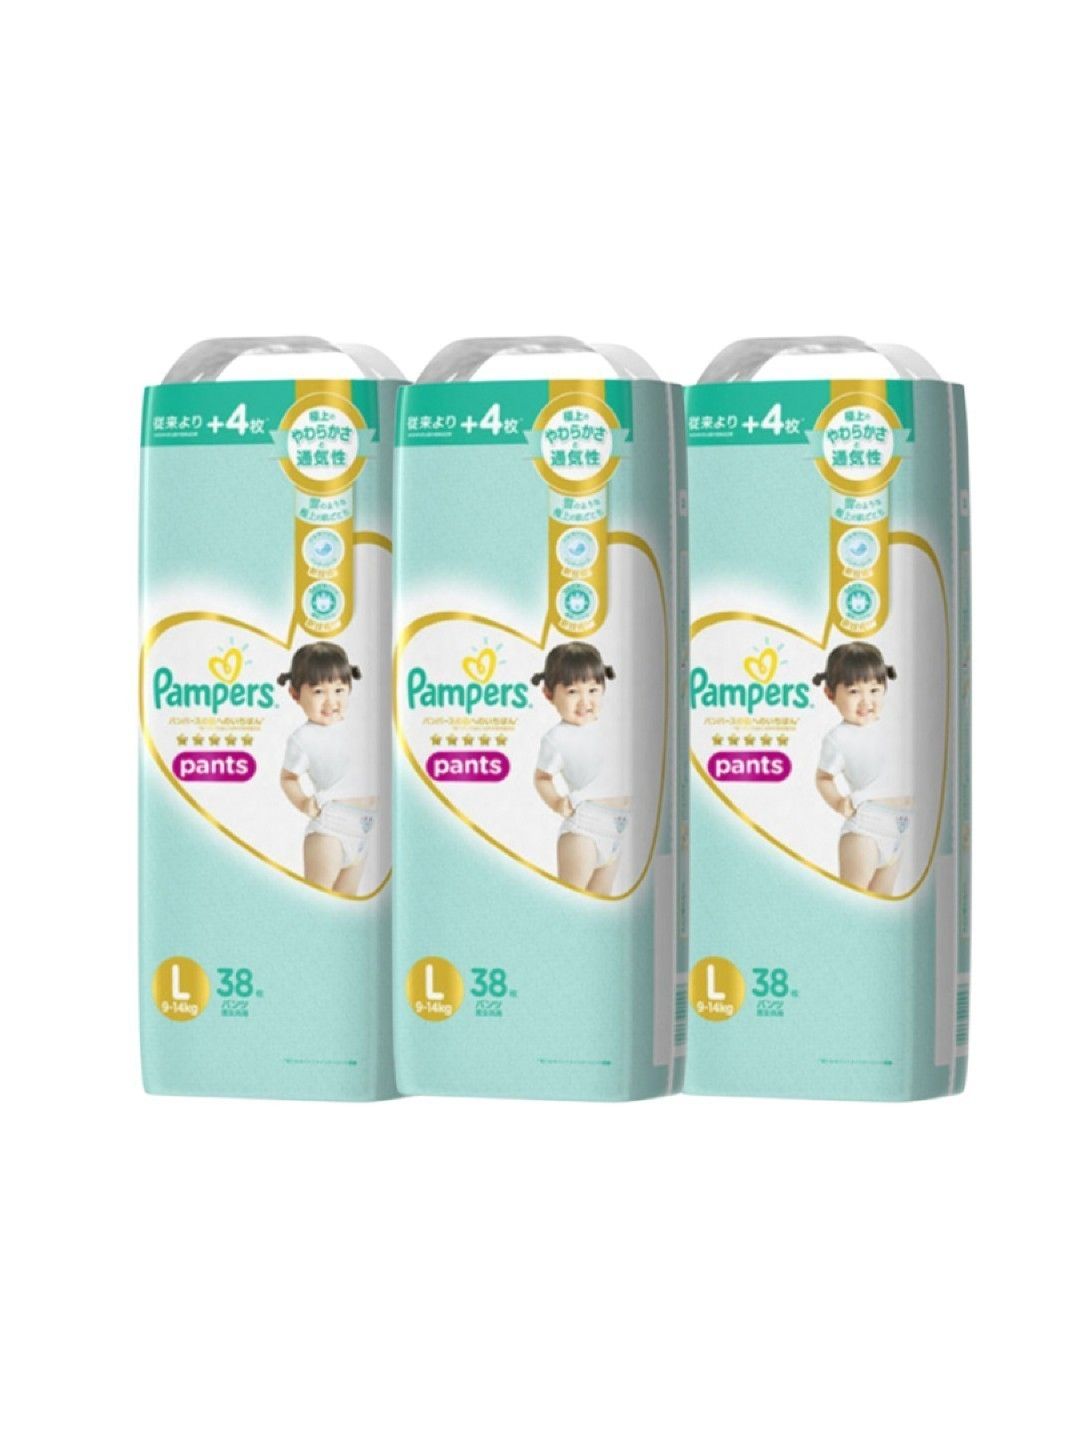 Buy Pampers Premium Care Pants - Large (L) Online On DMart Ready